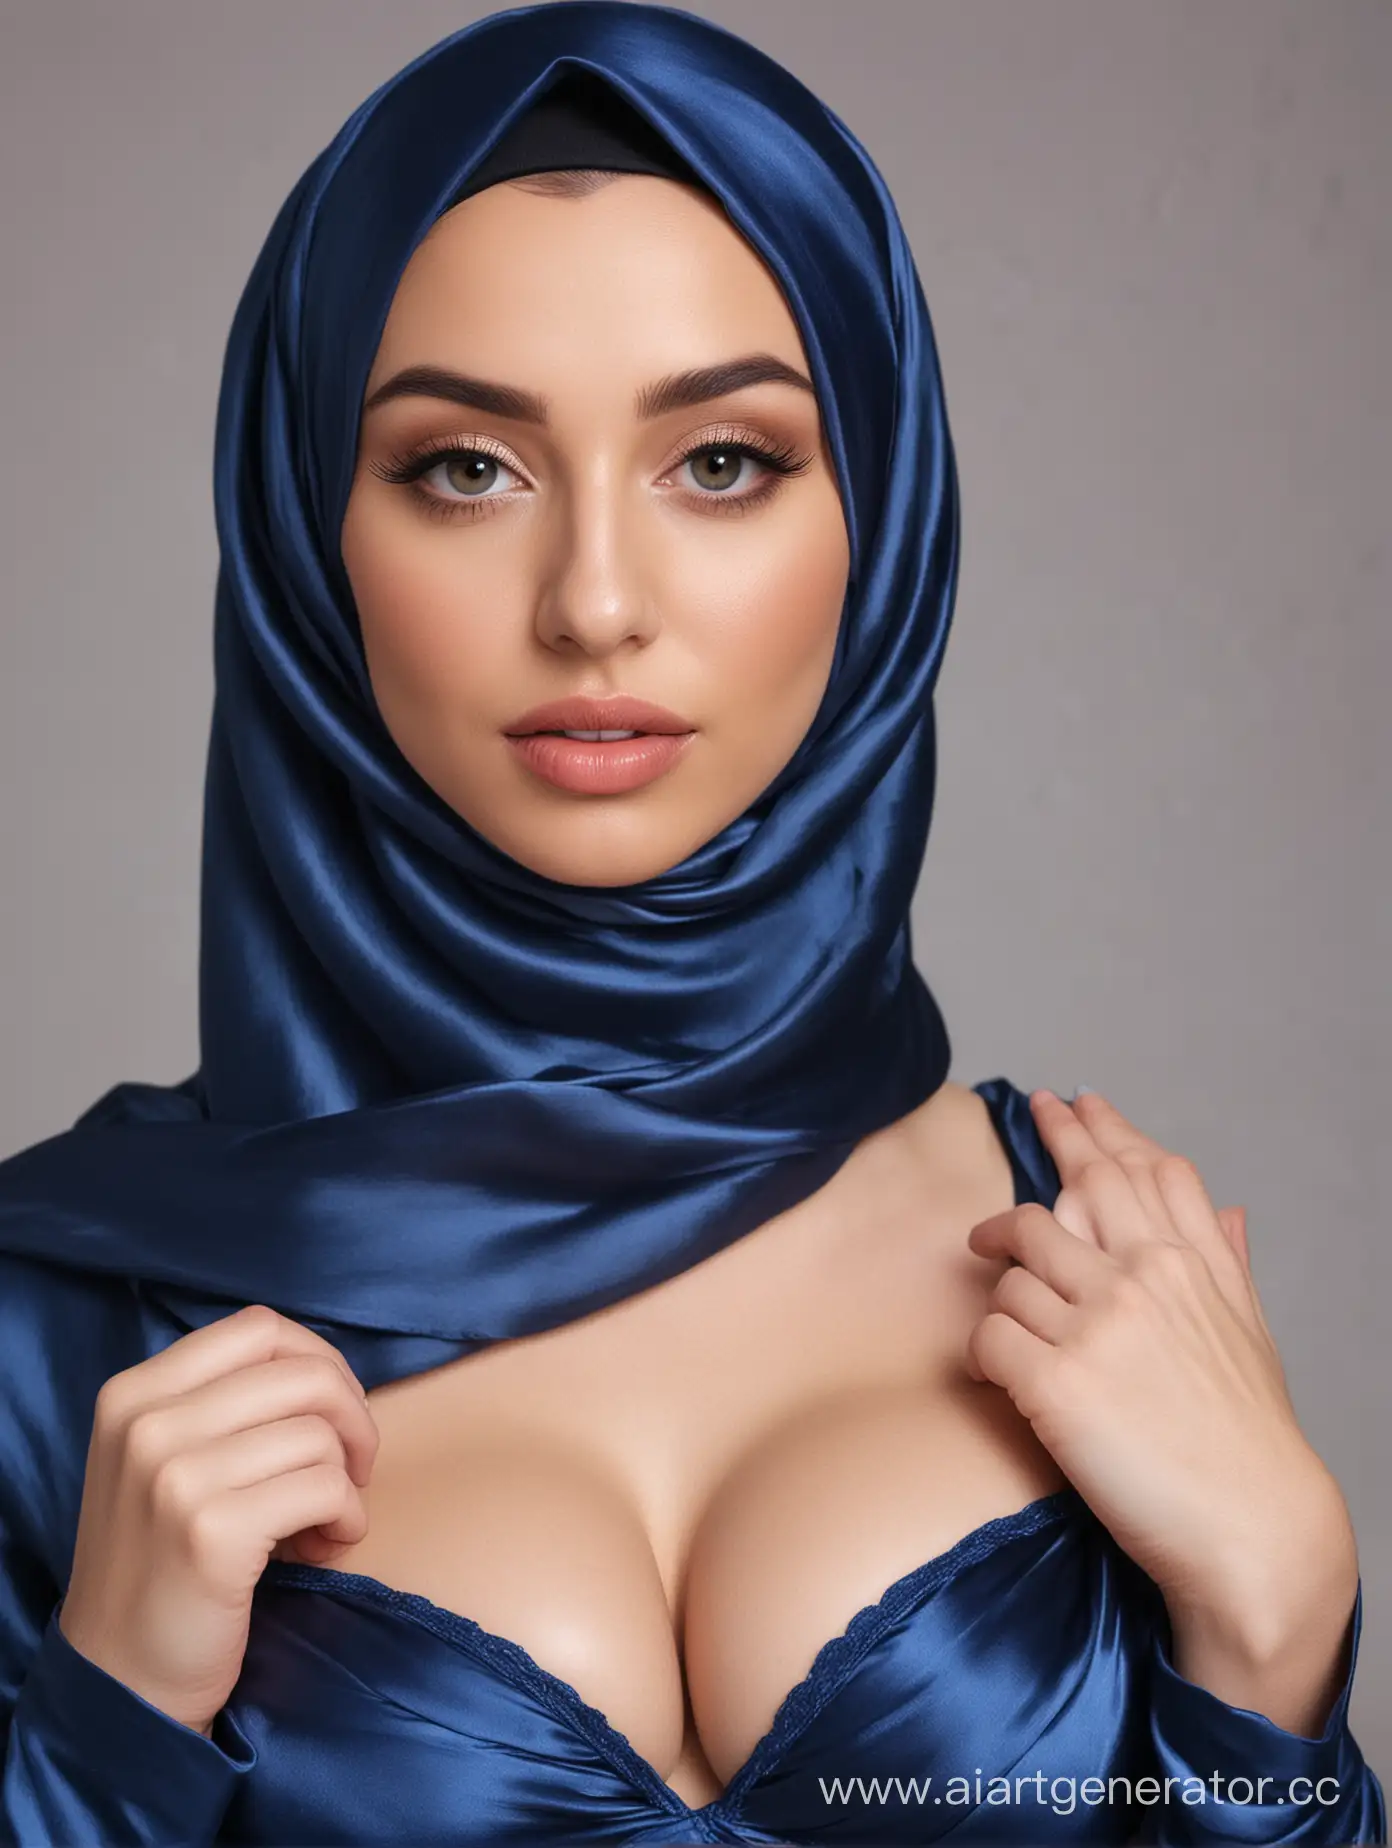 Young-Woman-in-Elegant-Blue-Hijab-and-Lingerie